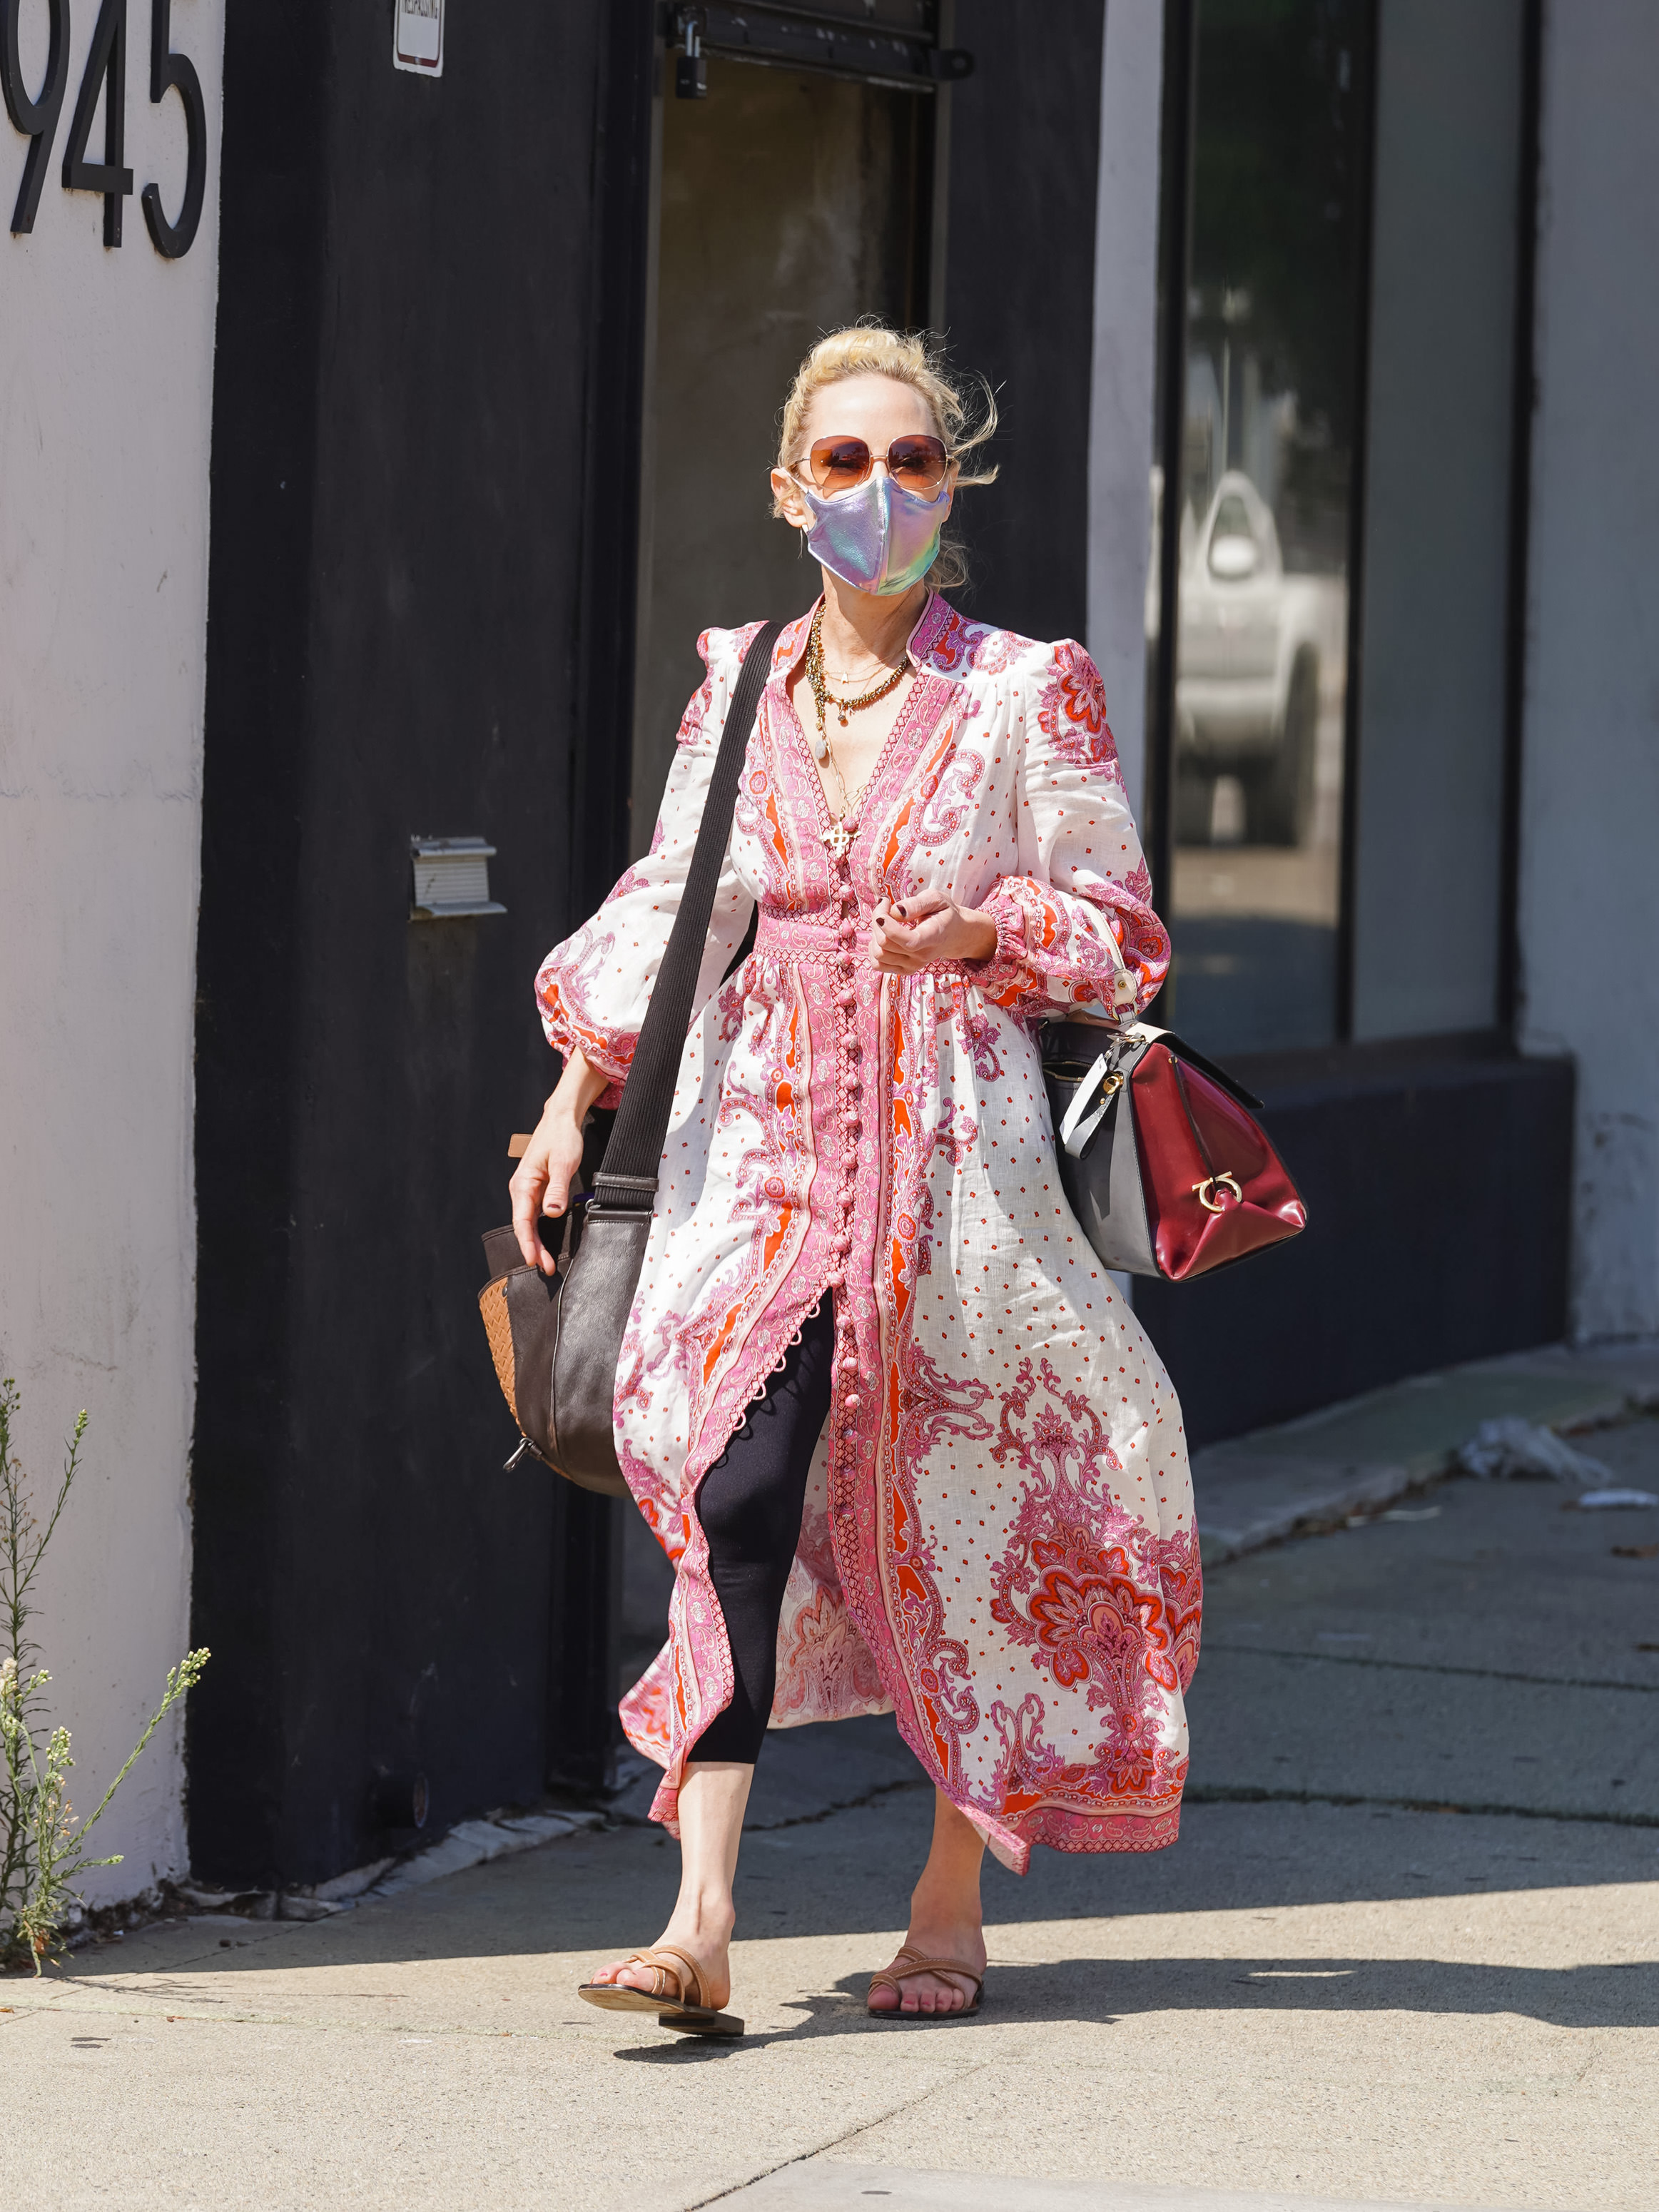 Anne Heche is seen outside 'Dancing With The Stars' rehearsal studio on September 24, 2020, in Los Angeles, California. | Source: Getty Images